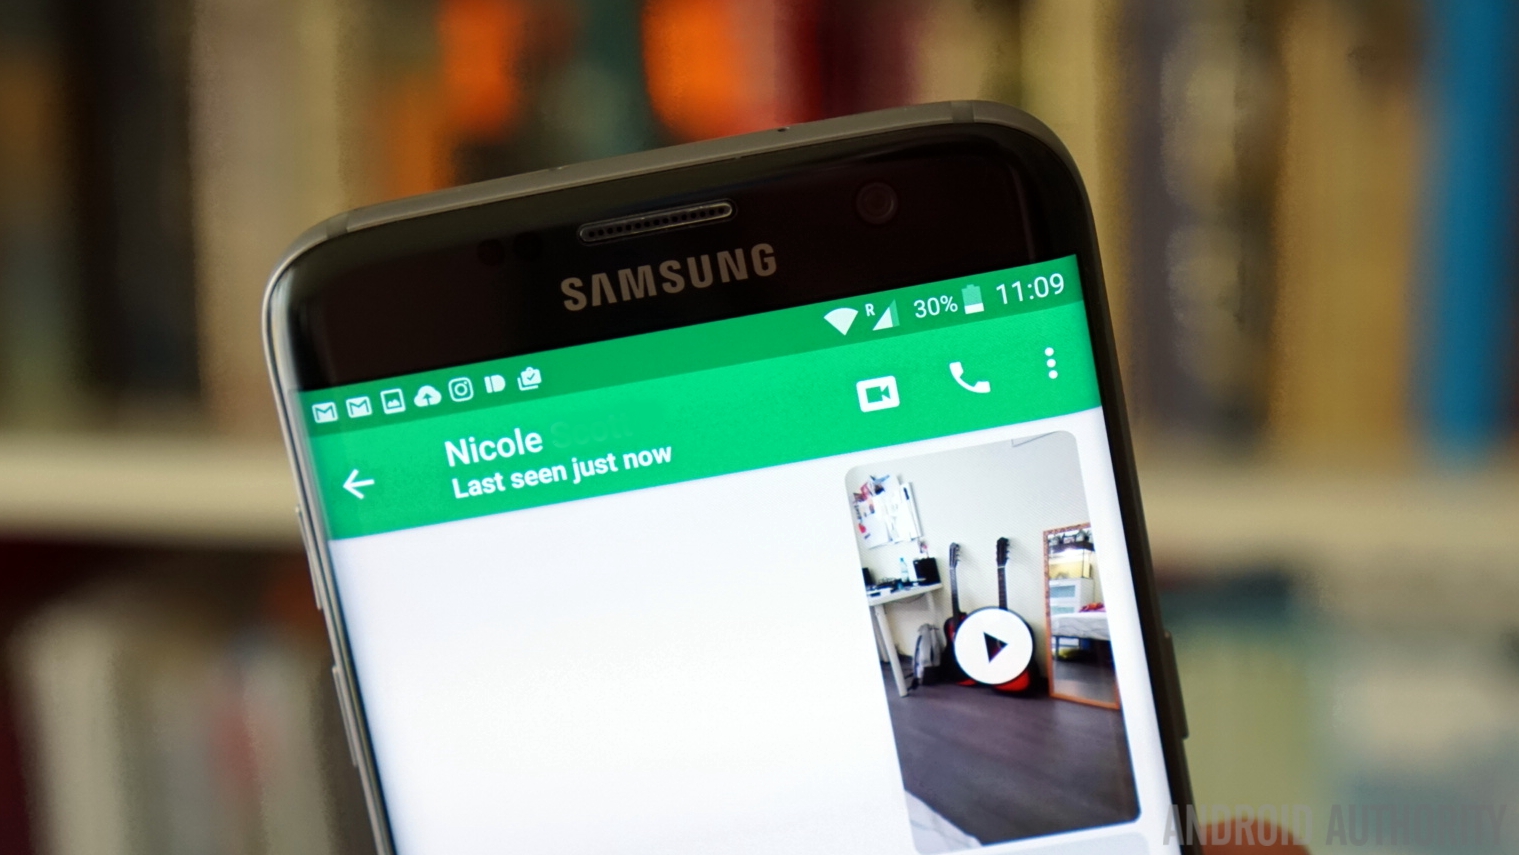 best video calling apps for android